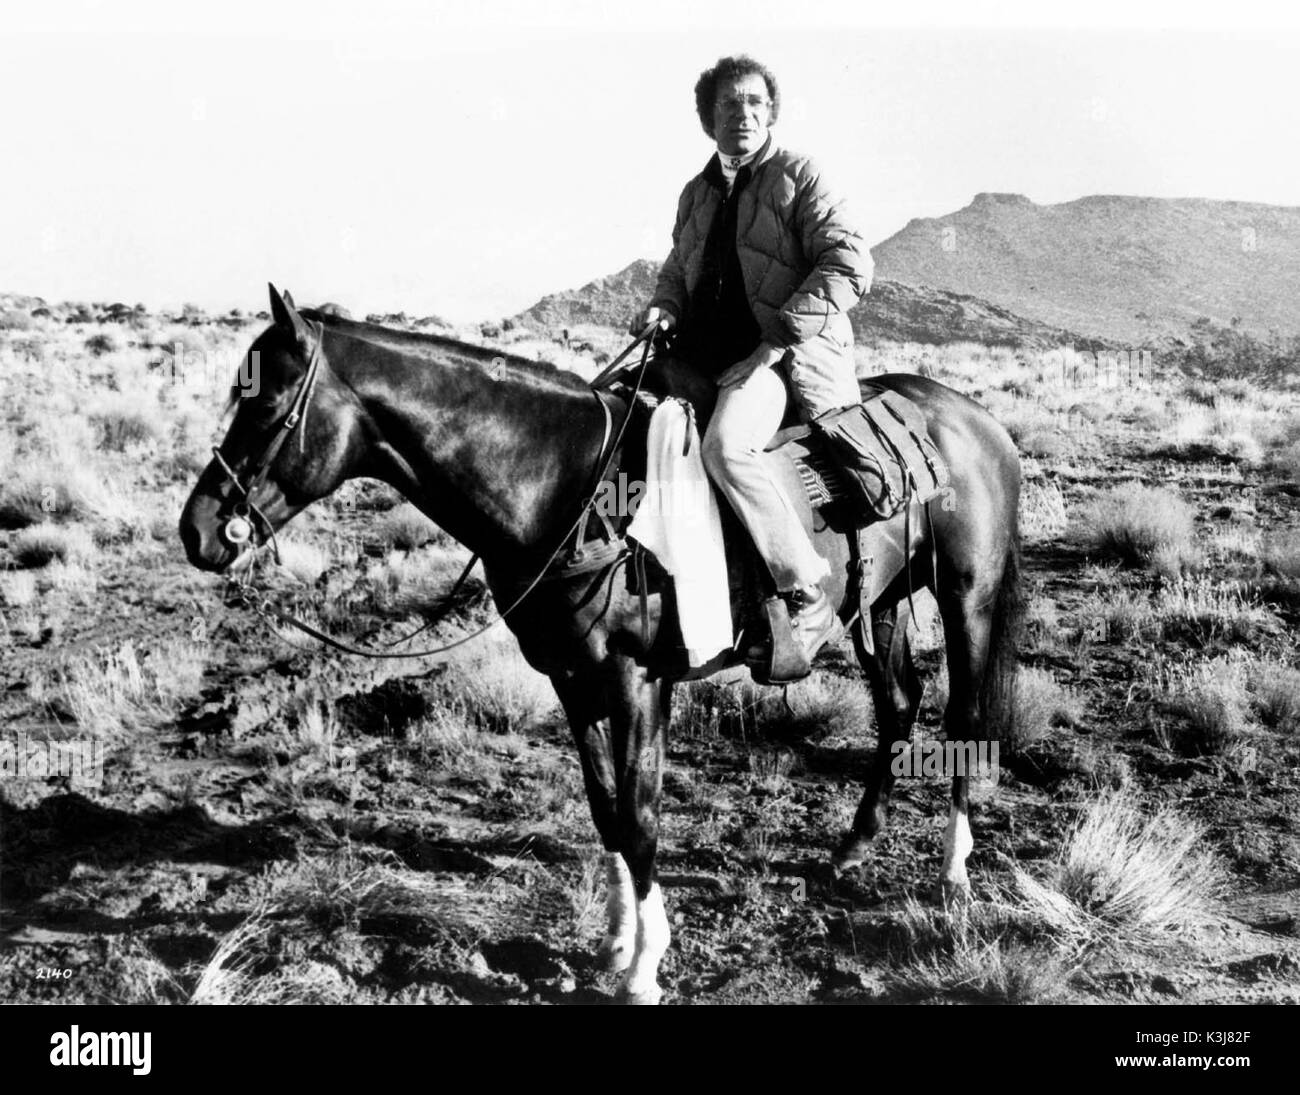 THE ELECTRIC HORSEMAN Director / Actor SYDNEY POLLACK      Date: 1979 Stock Photo